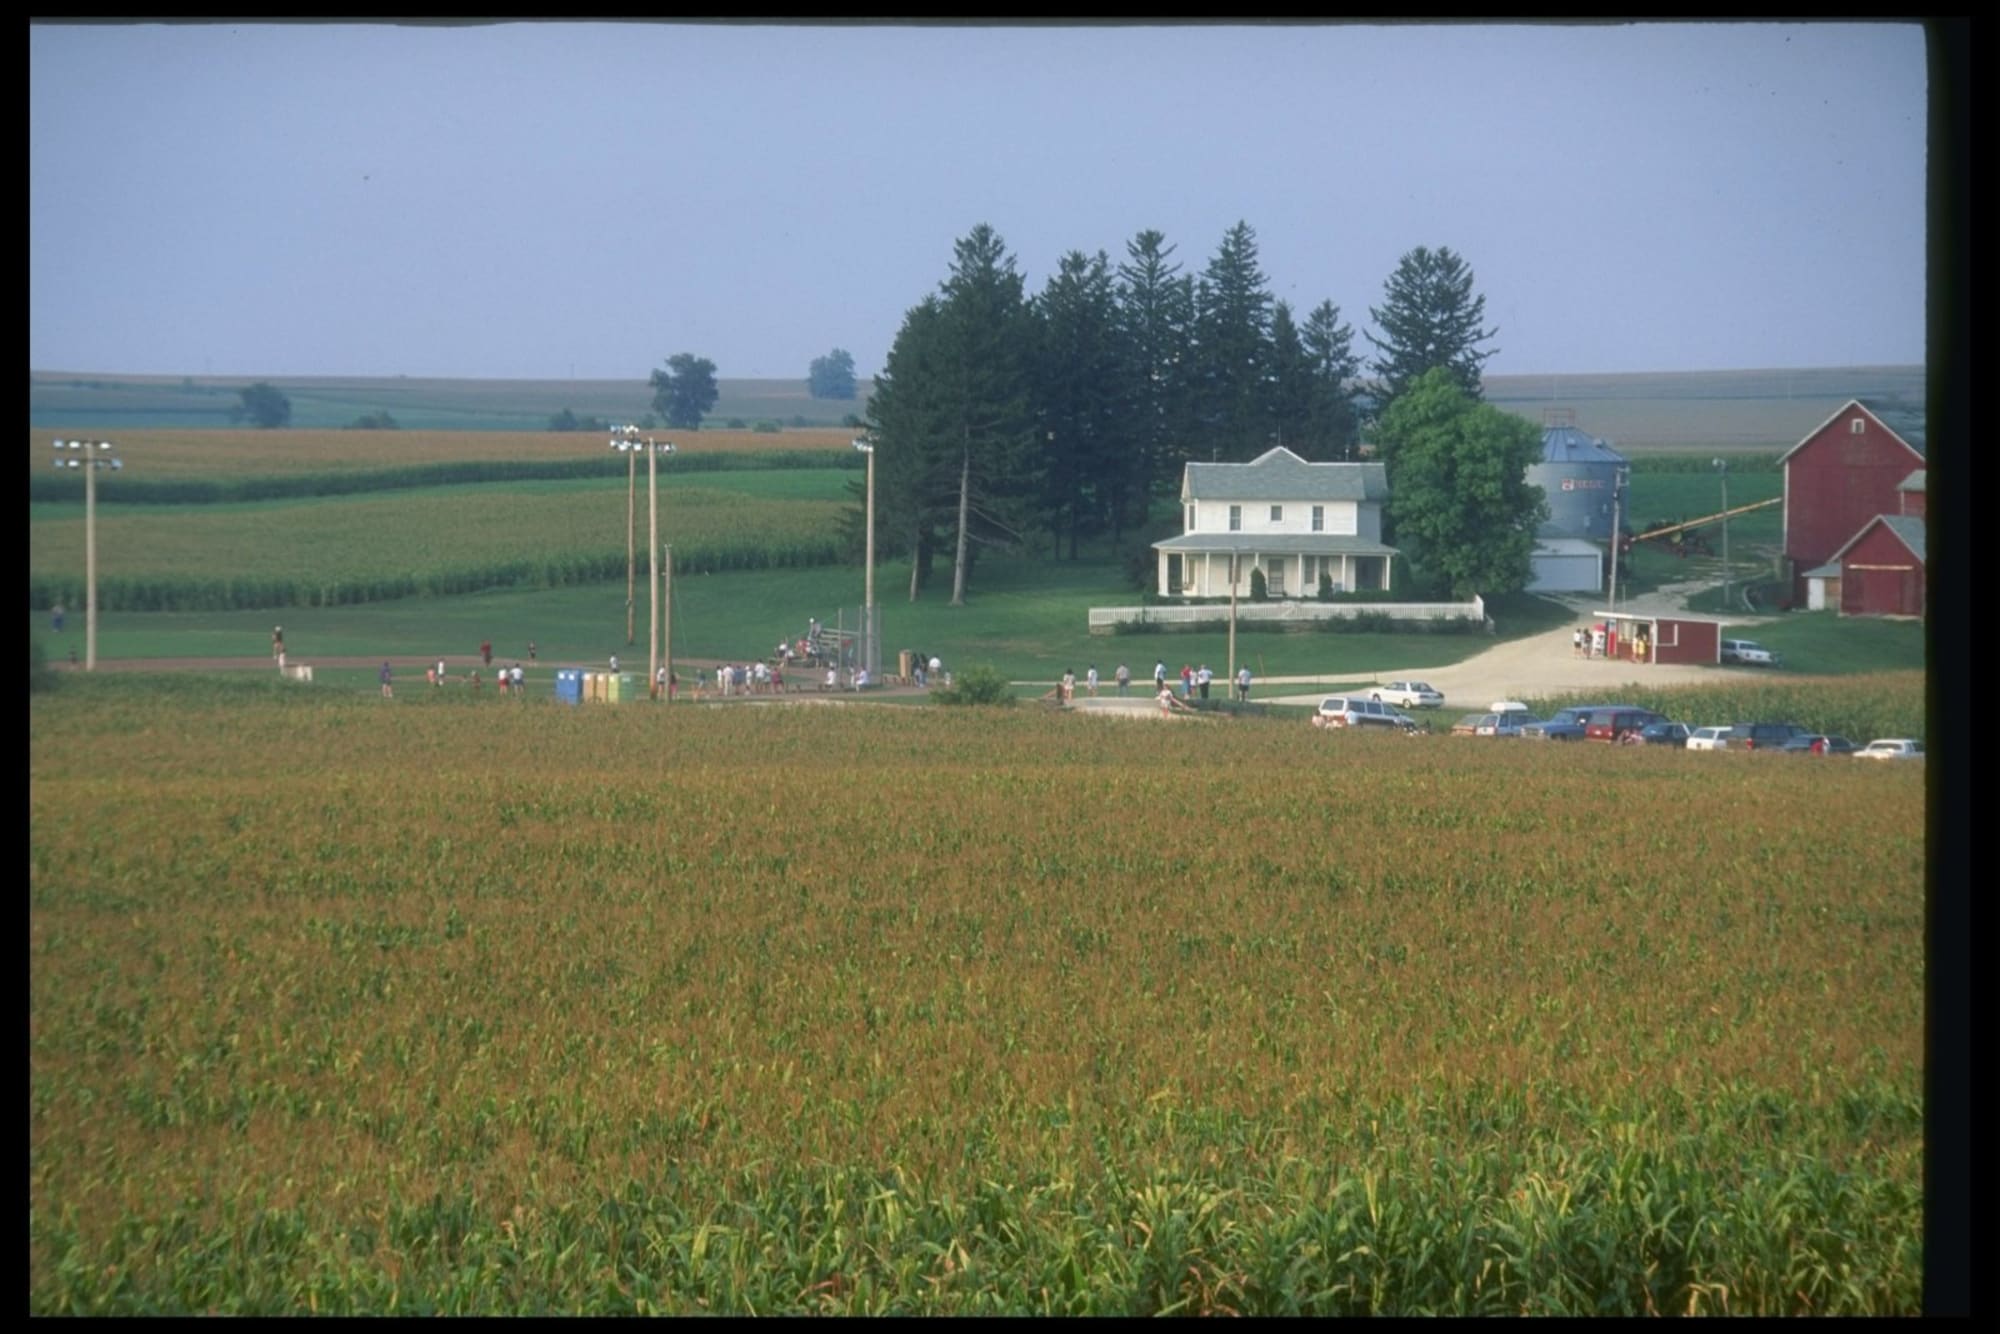 Revisiting five classic scenes from Field of Dreams